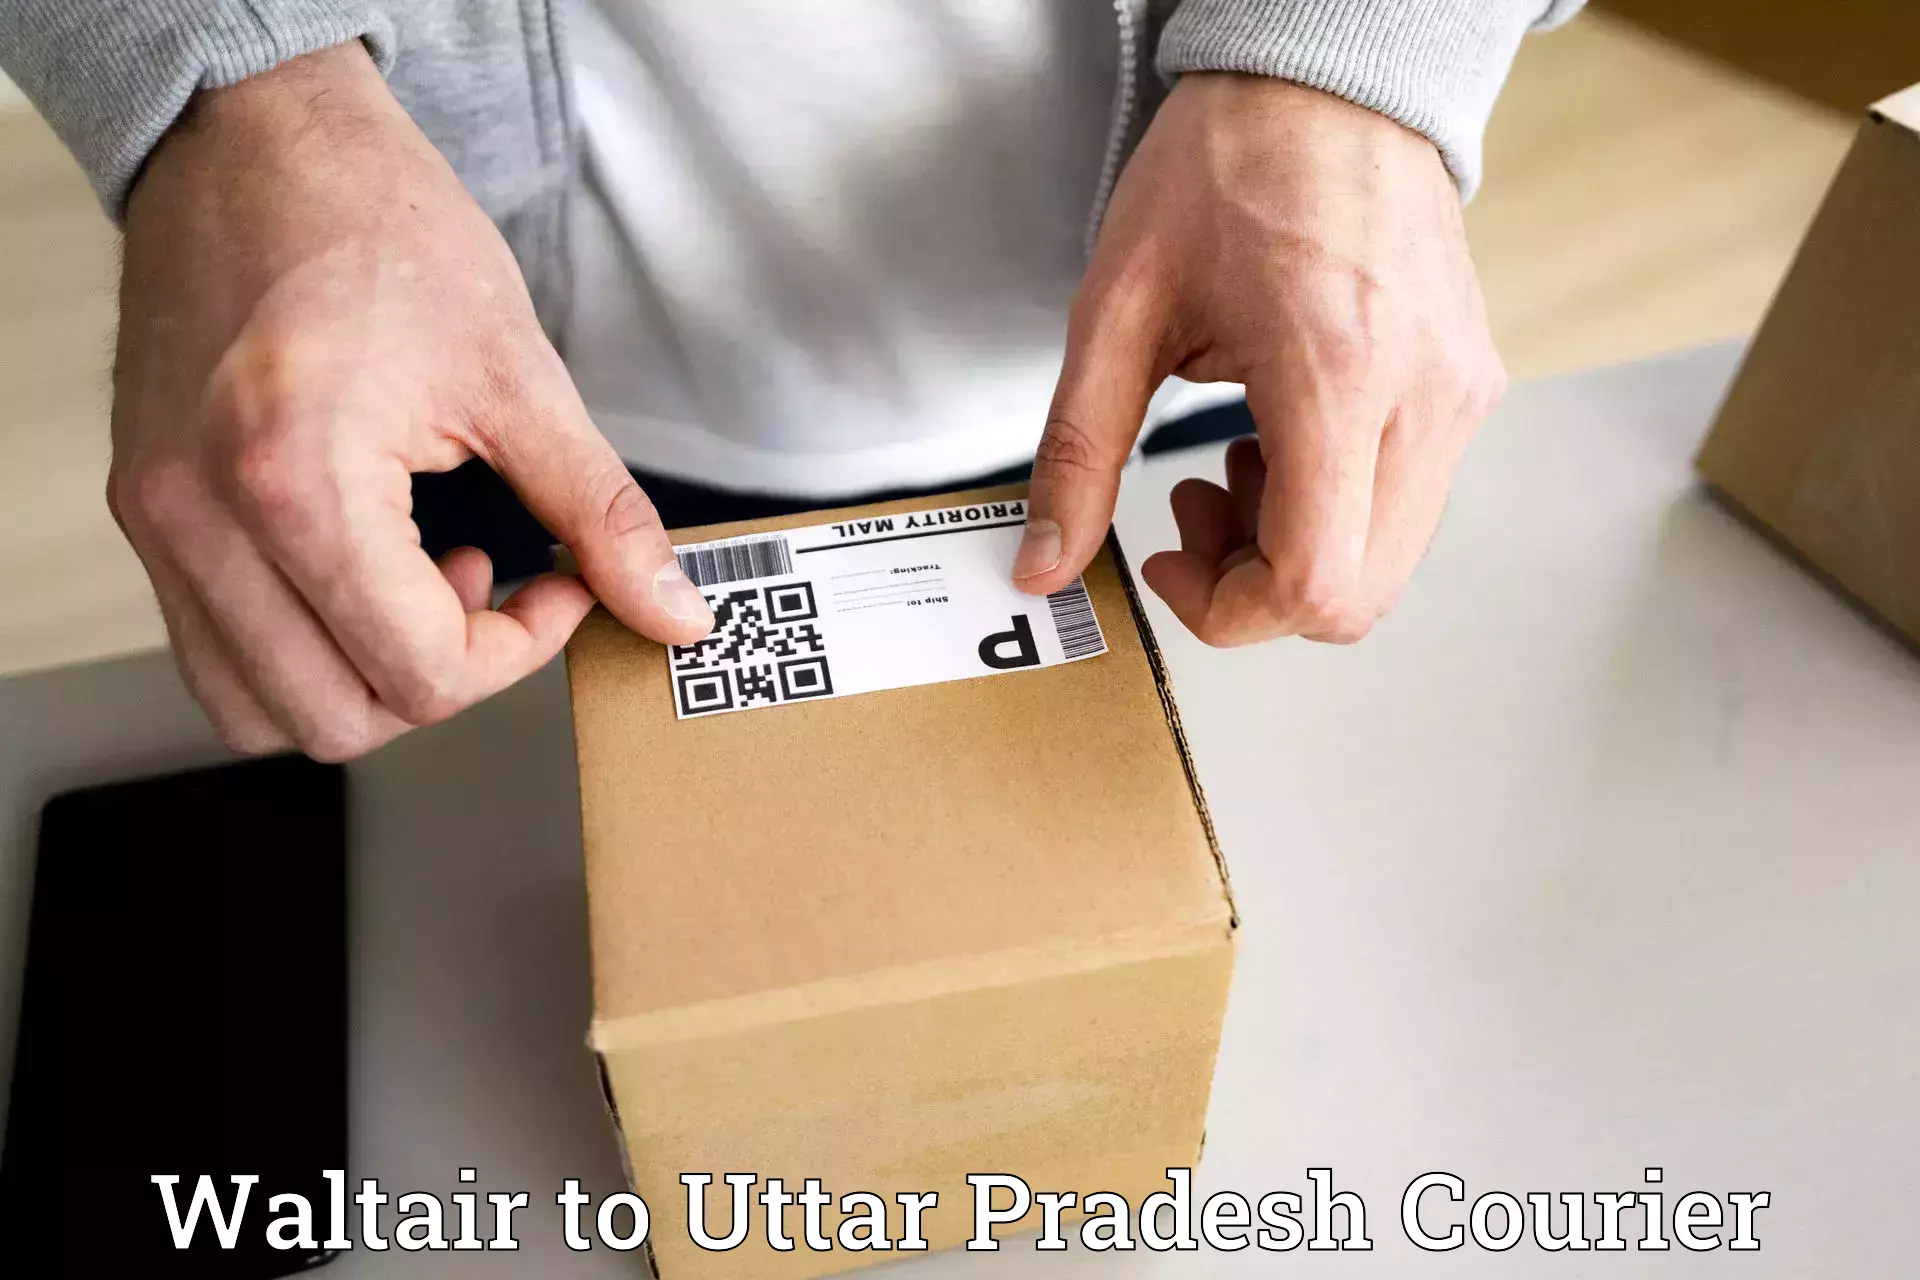 Courier service innovation Waltair to Moradabad